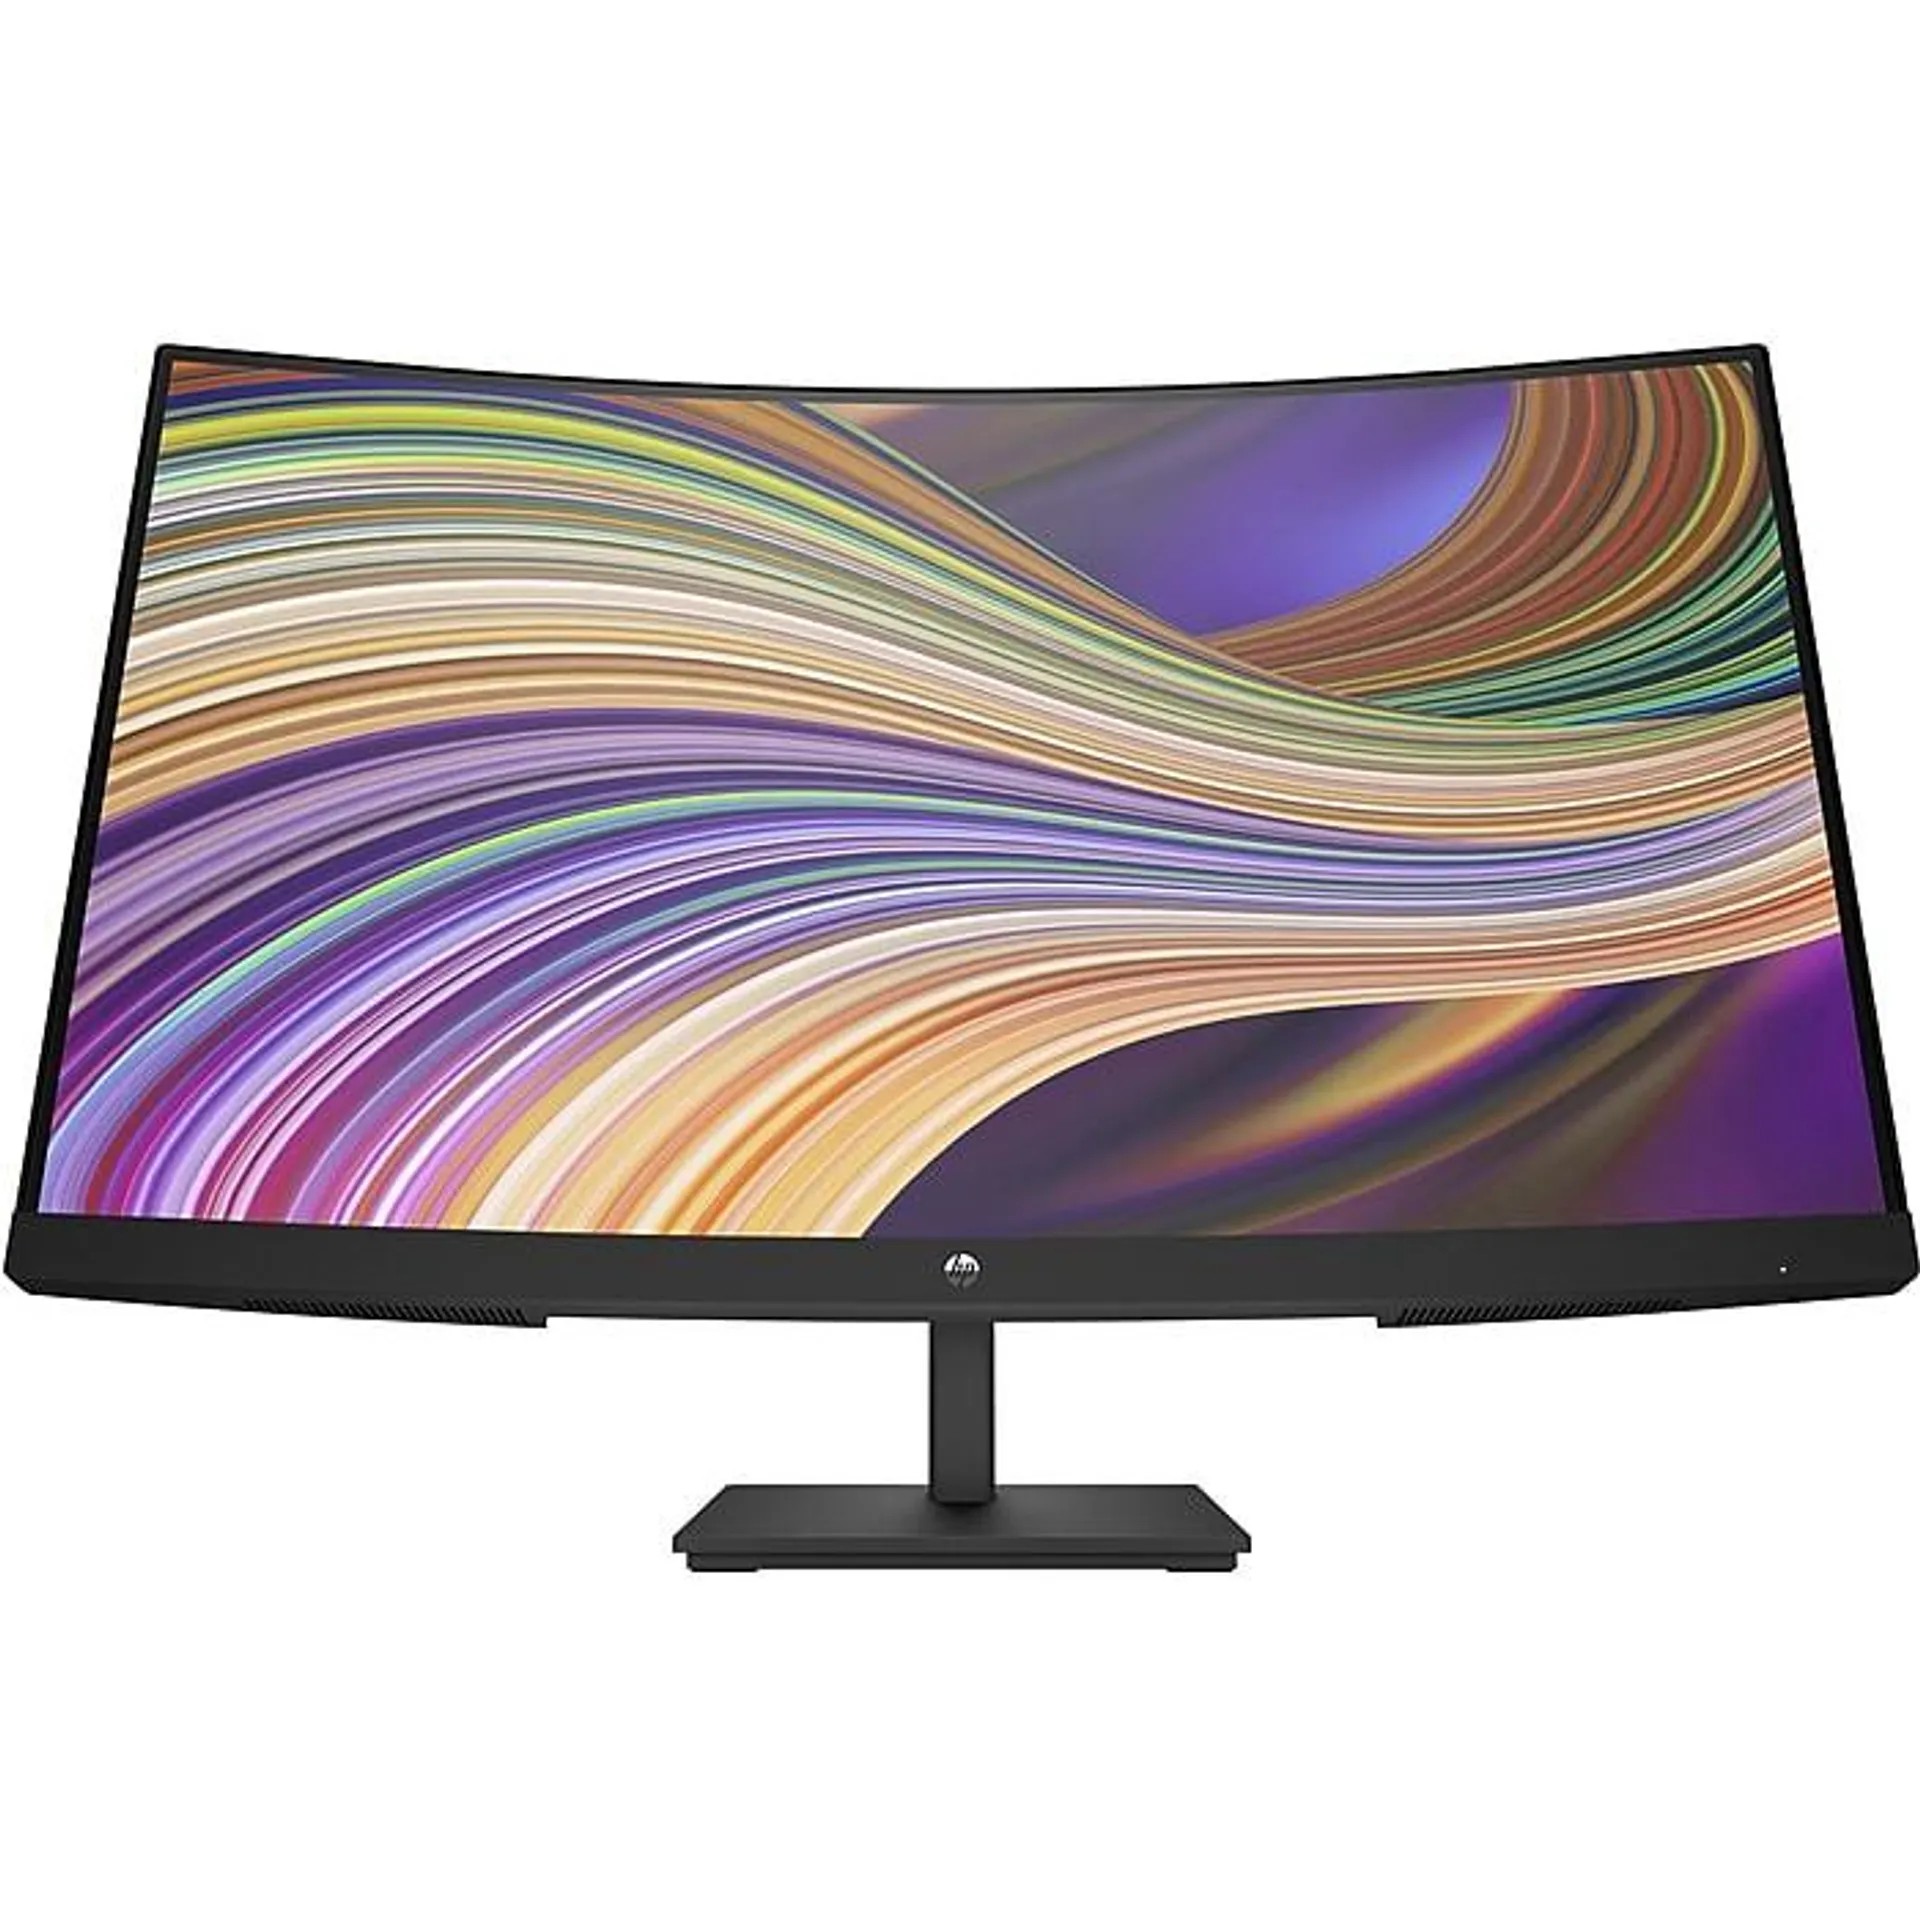 HP V27c G5 27" Curved LCD Monitor,